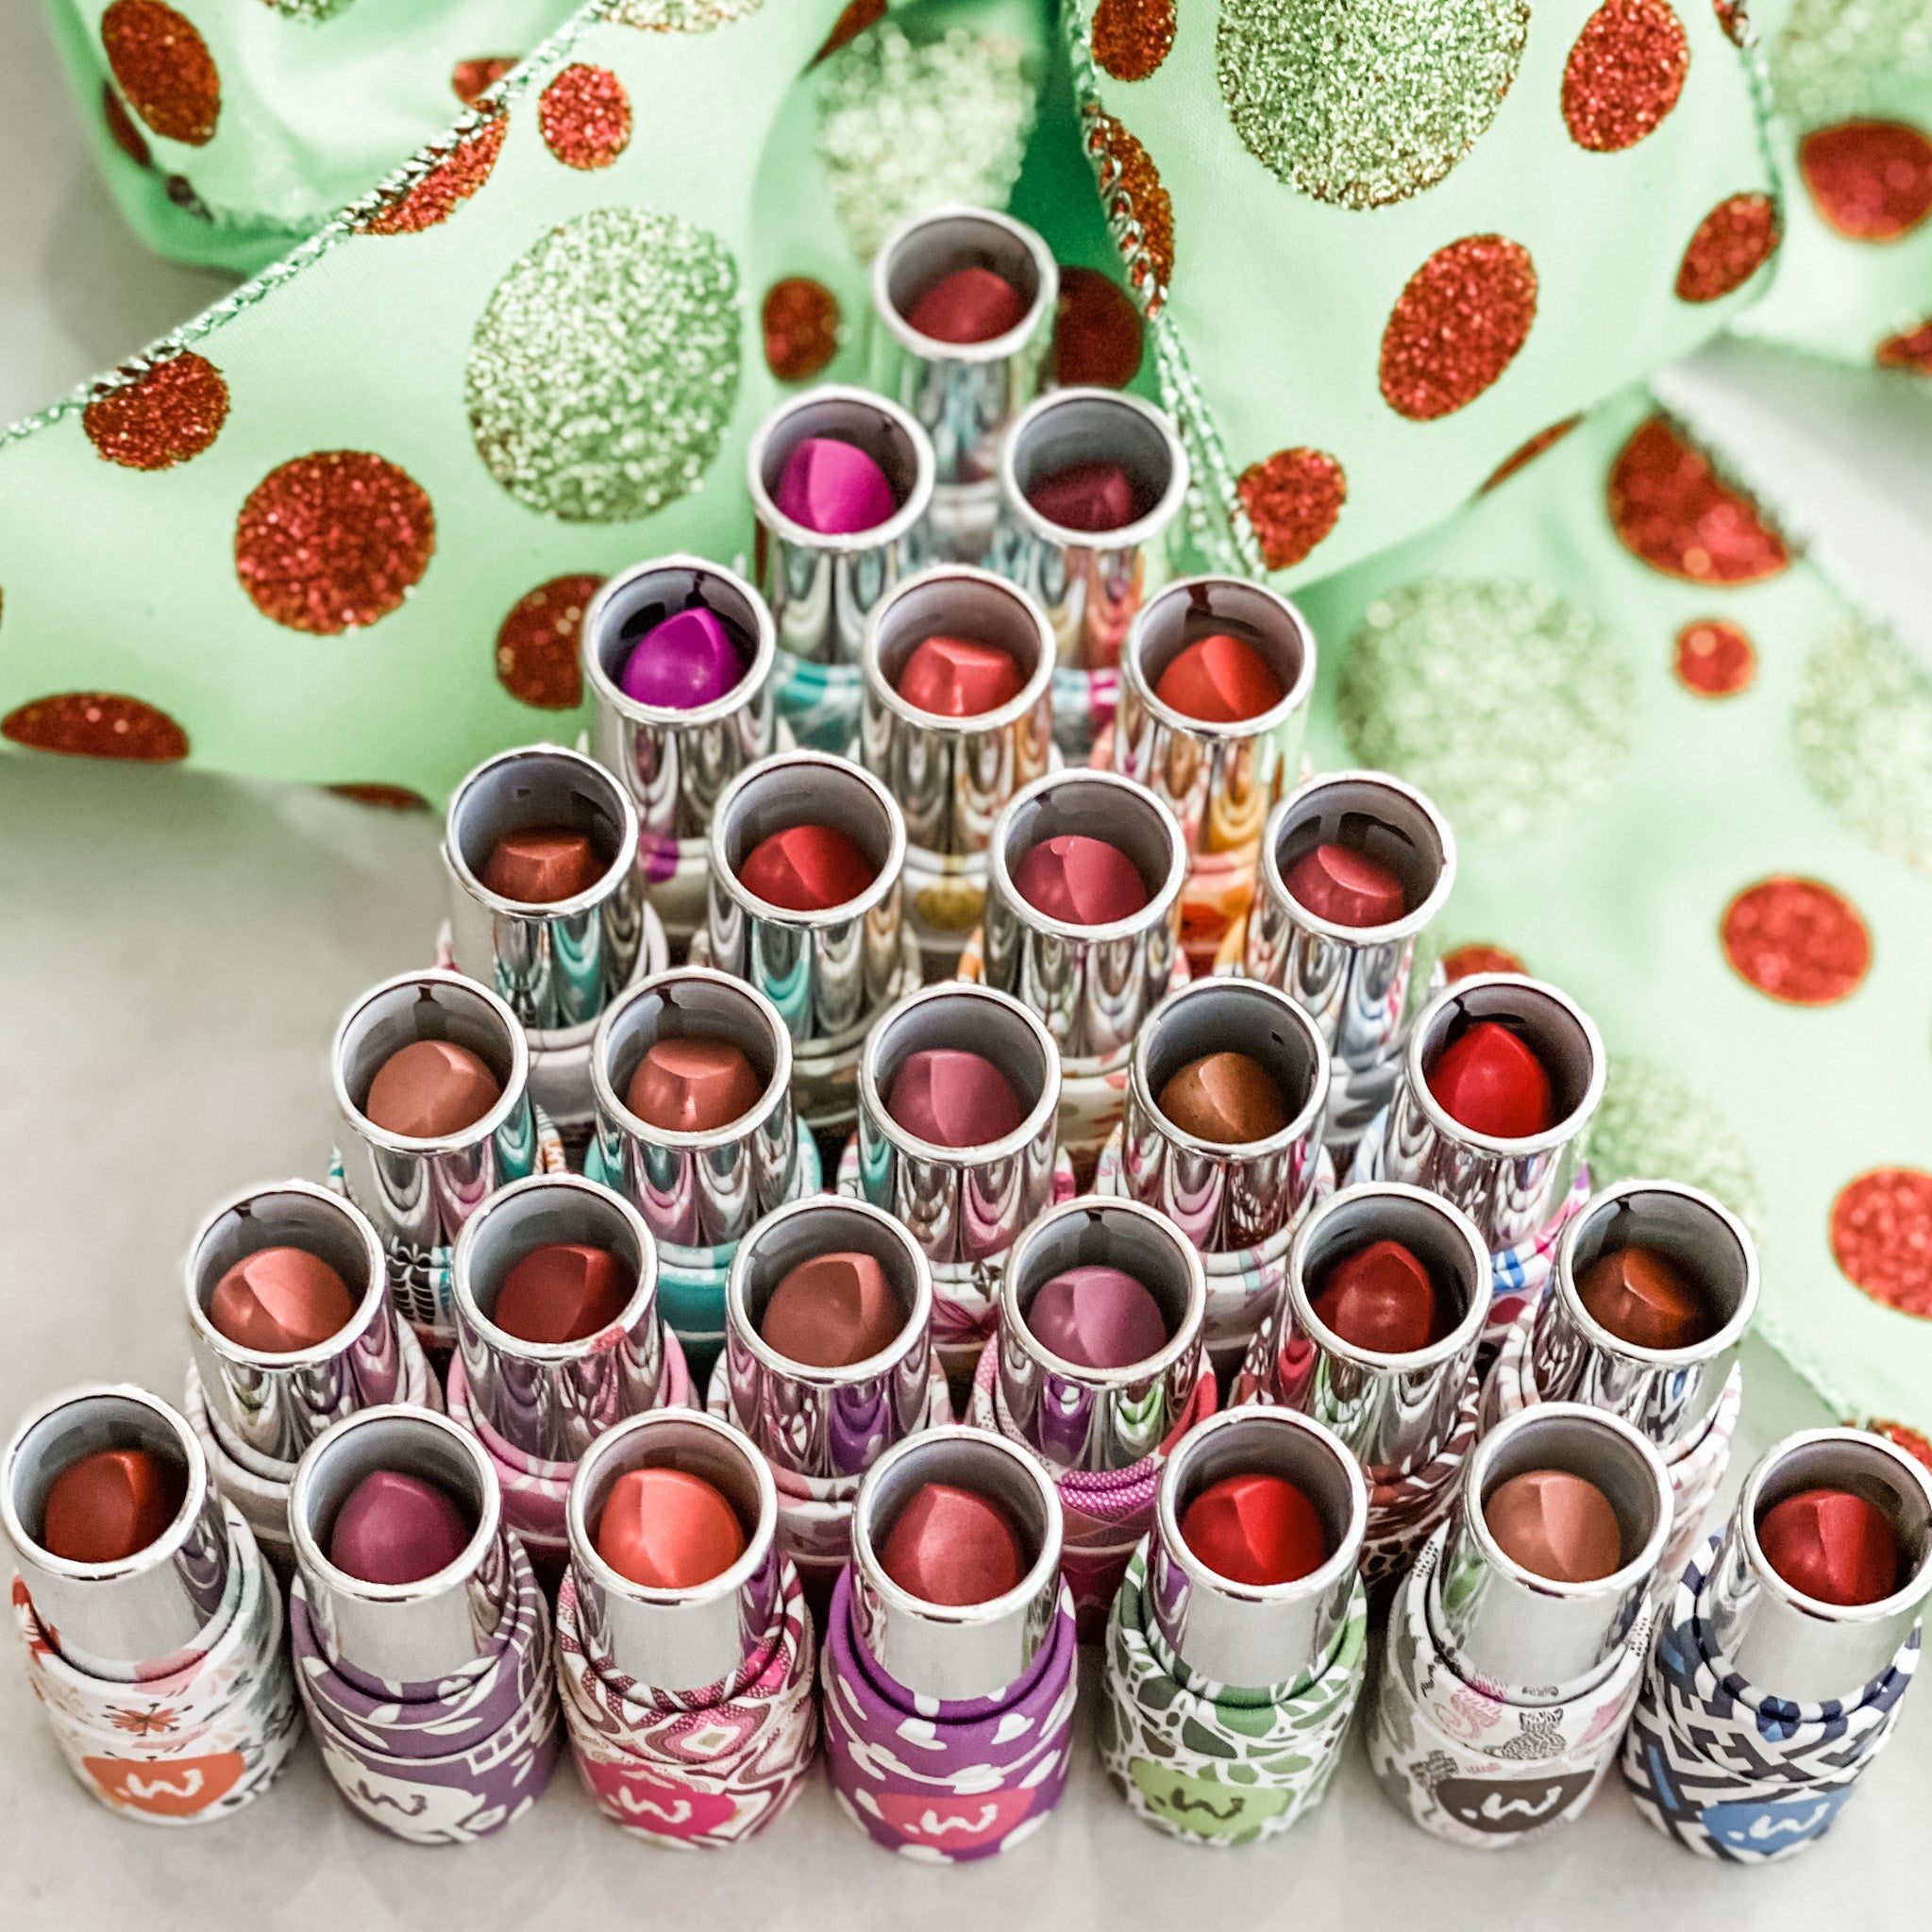 Our experts top 8 picks for Holiday lipstick colors and trends